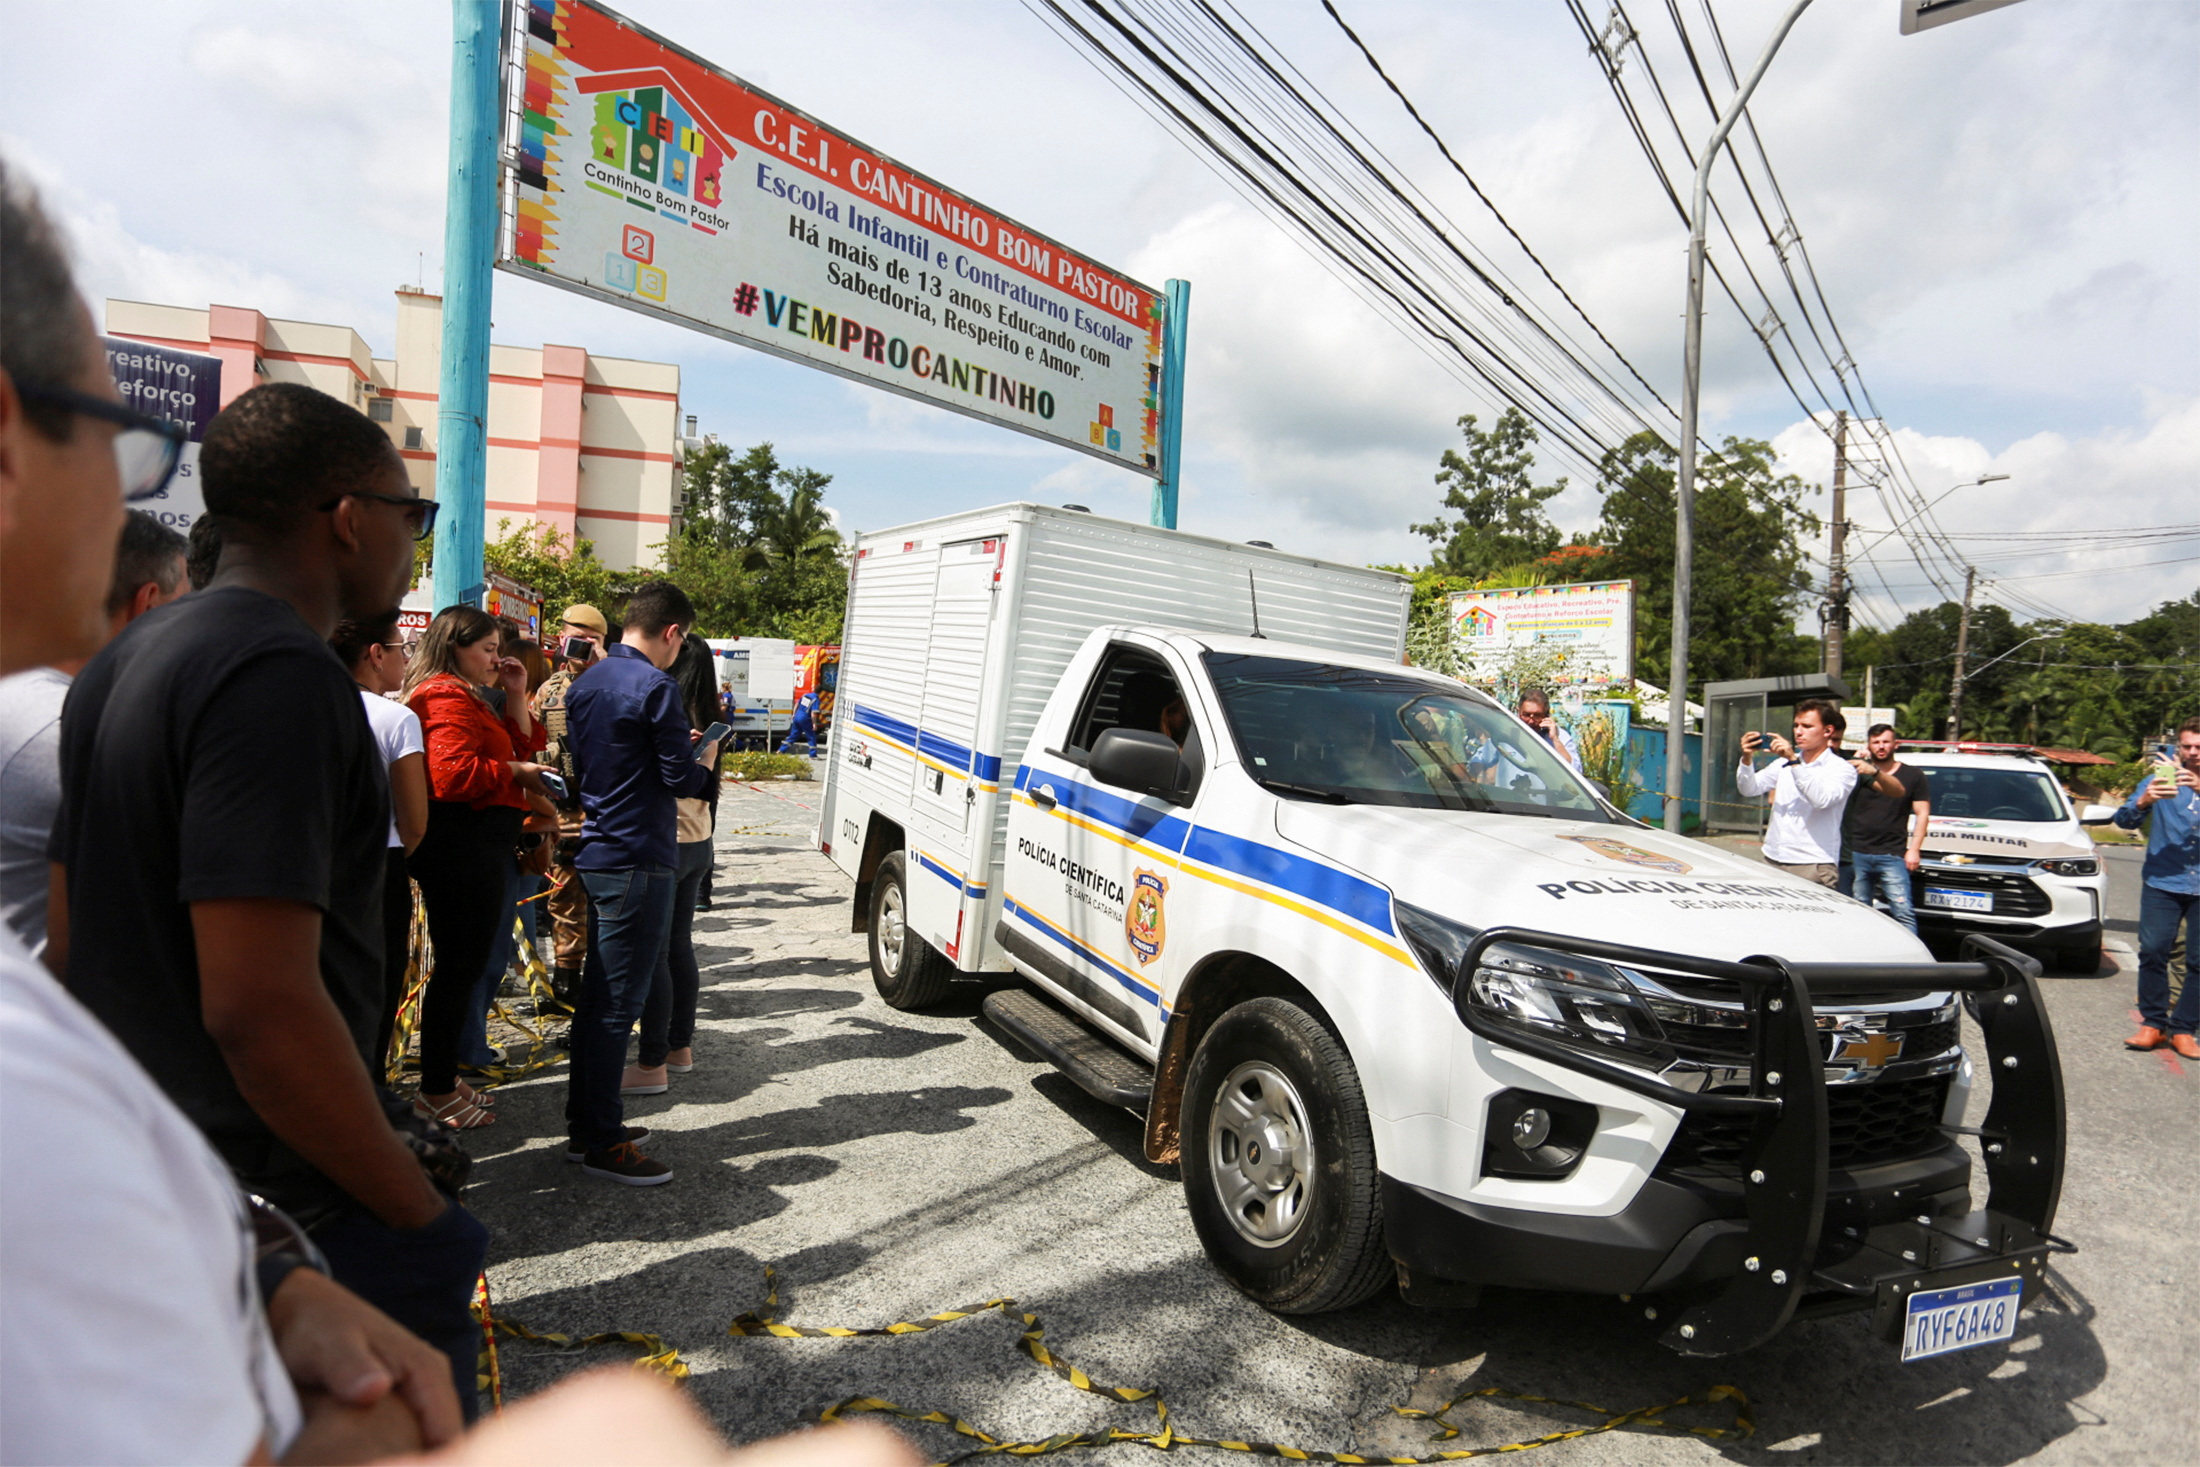 A preschool in Brazil where a 25-year-old man attacked children, killing several and injuring others. Photo: Reuters